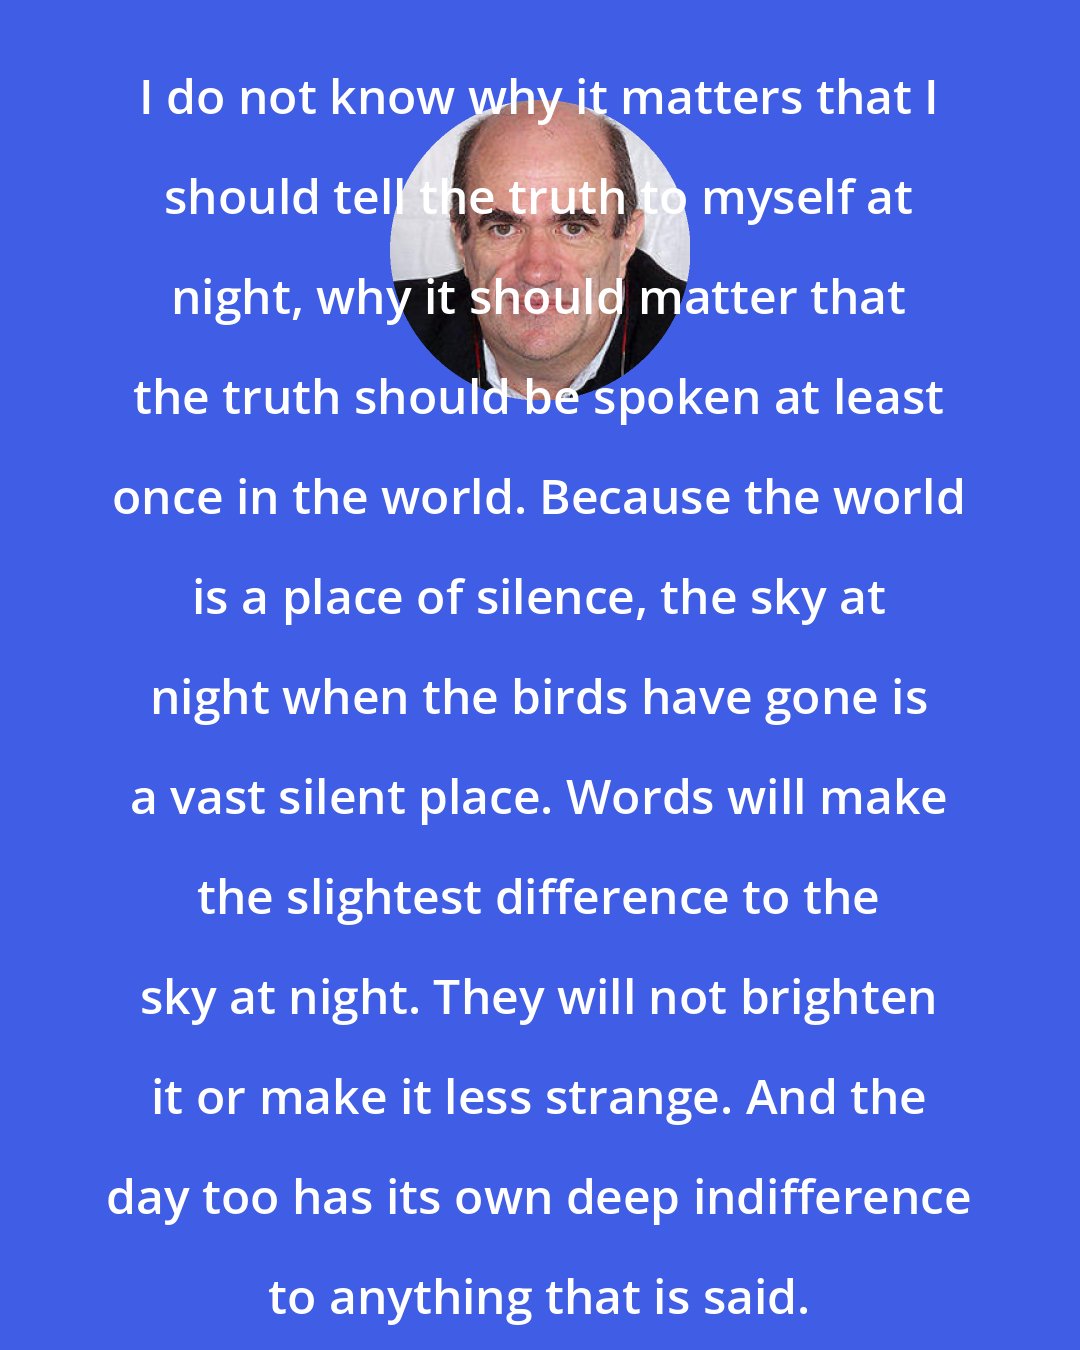 Colm Toibin: I do not know why it matters that I should tell the truth to myself at night, why it should matter that the truth should be spoken at least once in the world. Because the world is a place of silence, the sky at night when the birds have gone is a vast silent place. Words will make the slightest difference to the sky at night. They will not brighten it or make it less strange. And the day too has its own deep indifference to anything that is said.